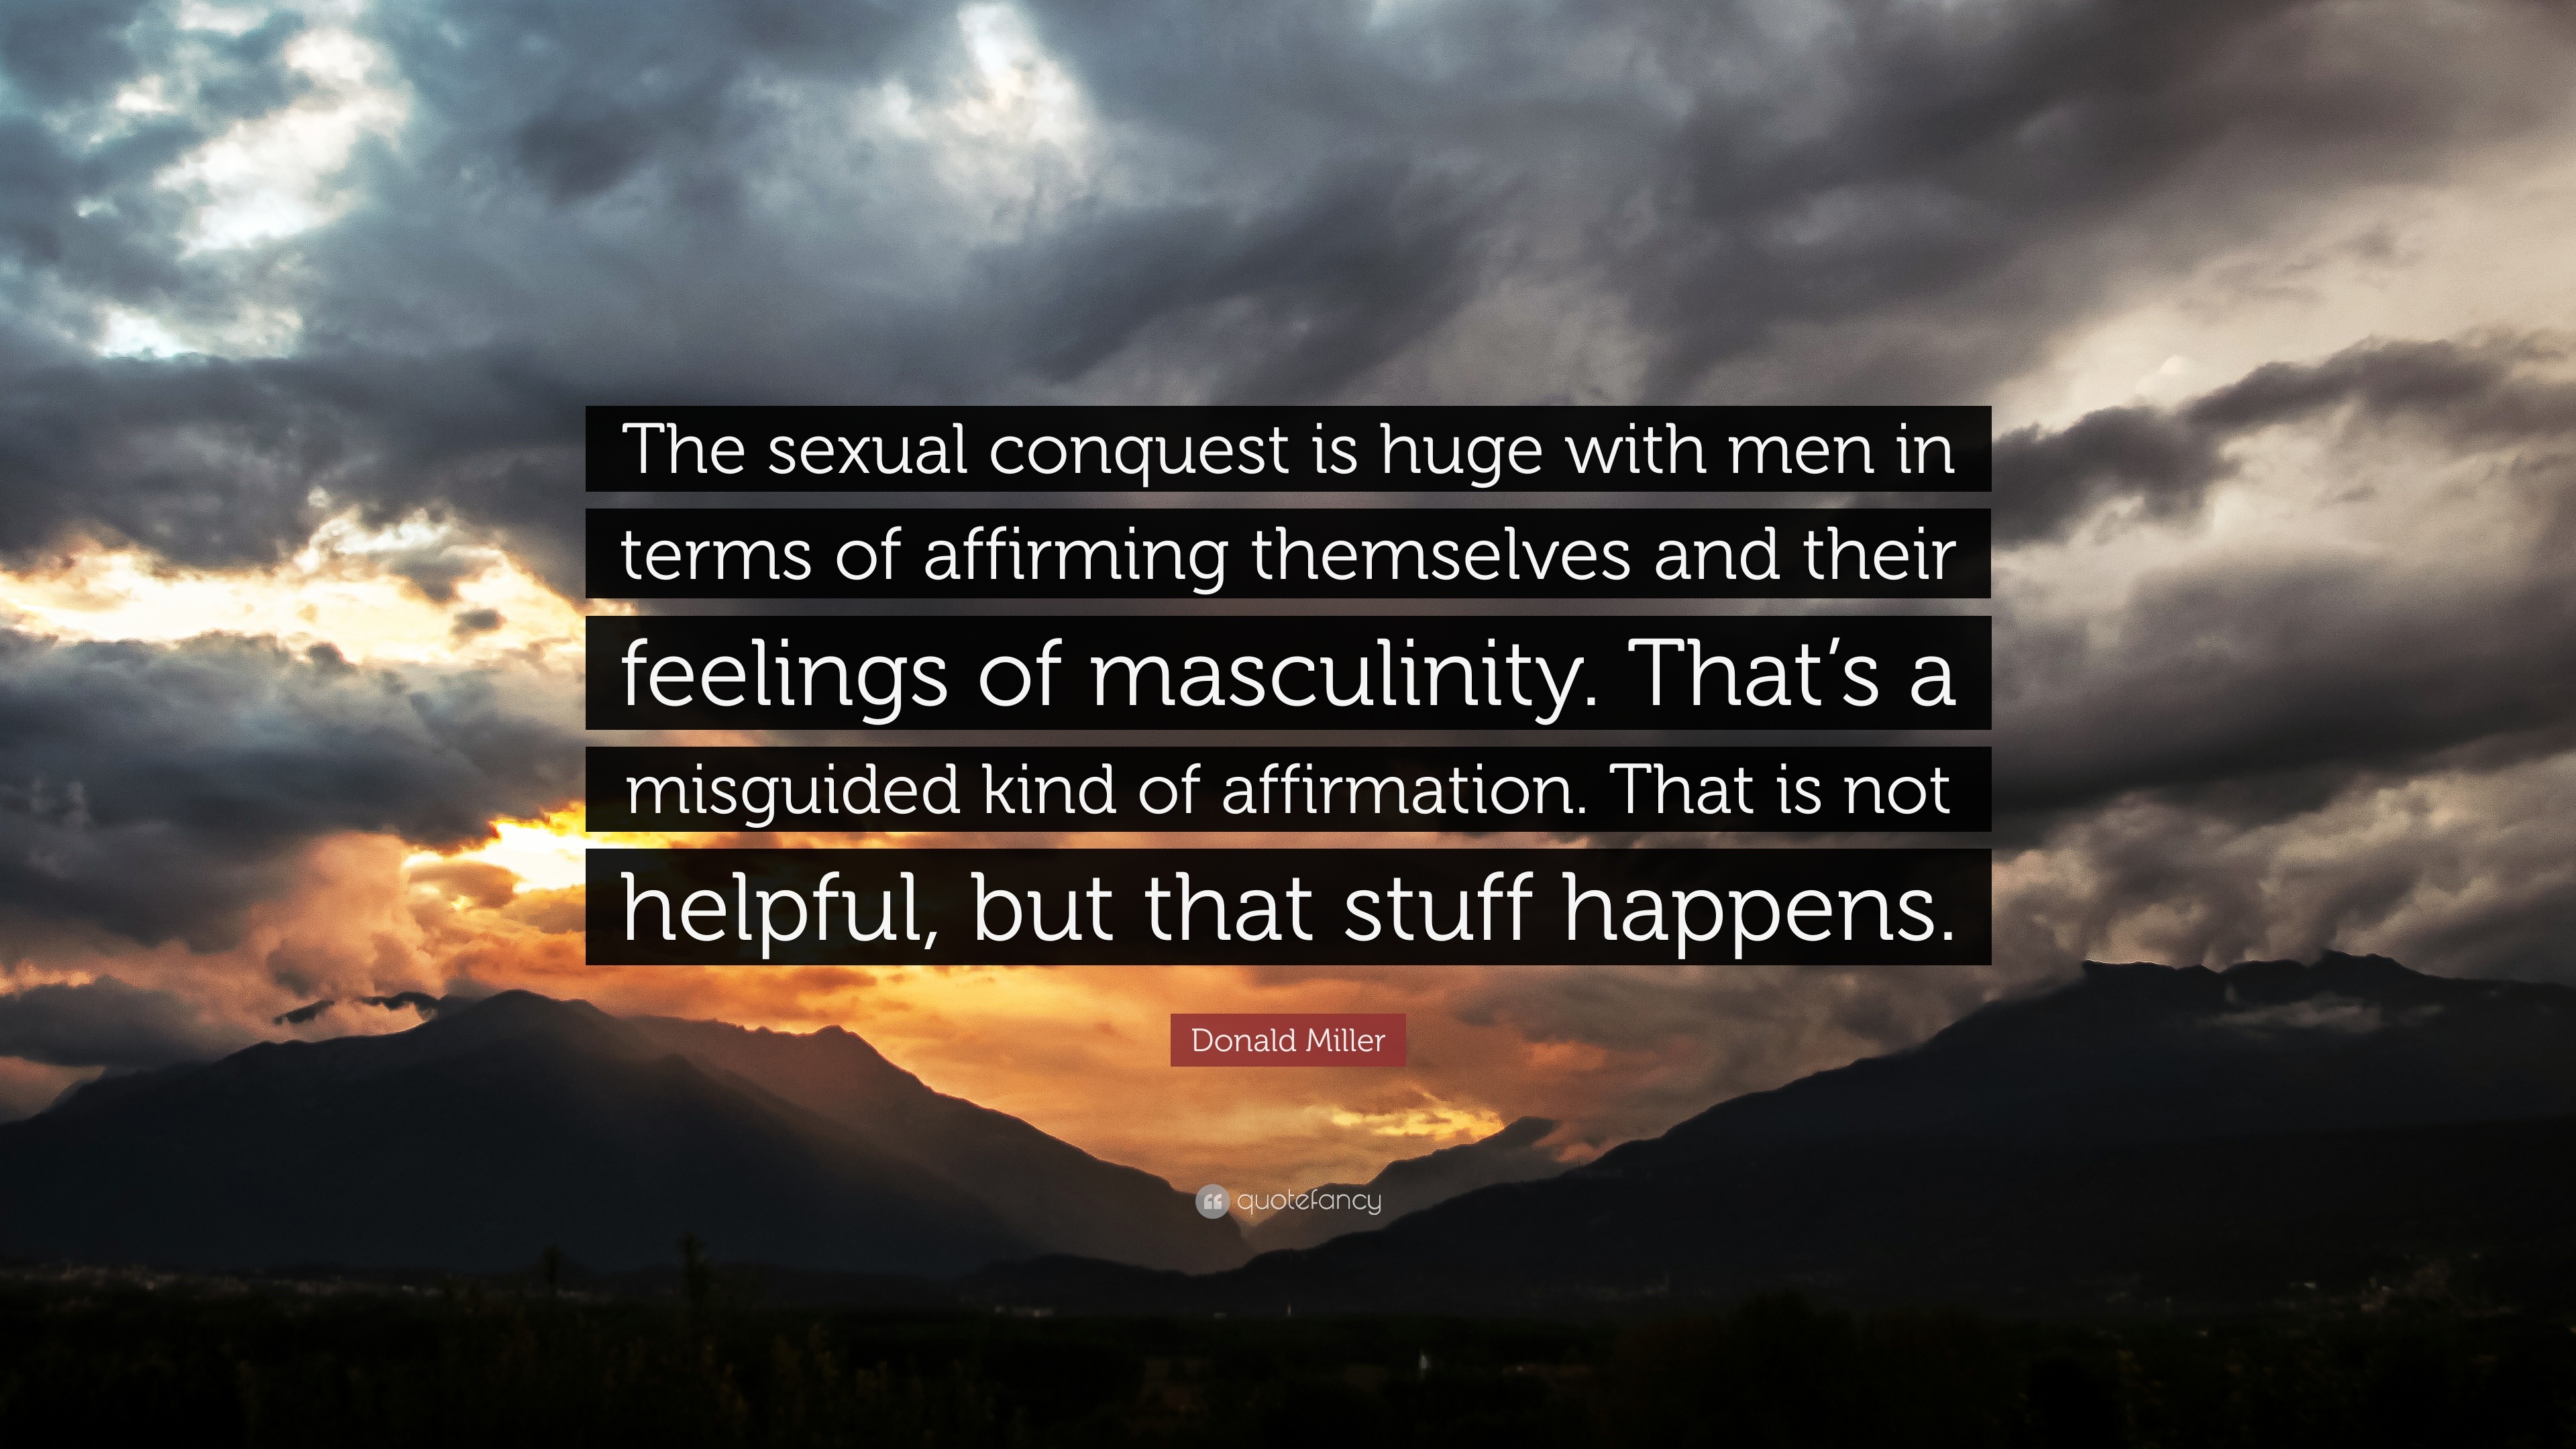 Donald Miller Quote “the Sexual Conquest Is Huge With Men In Terms Of Affirming Themselves And